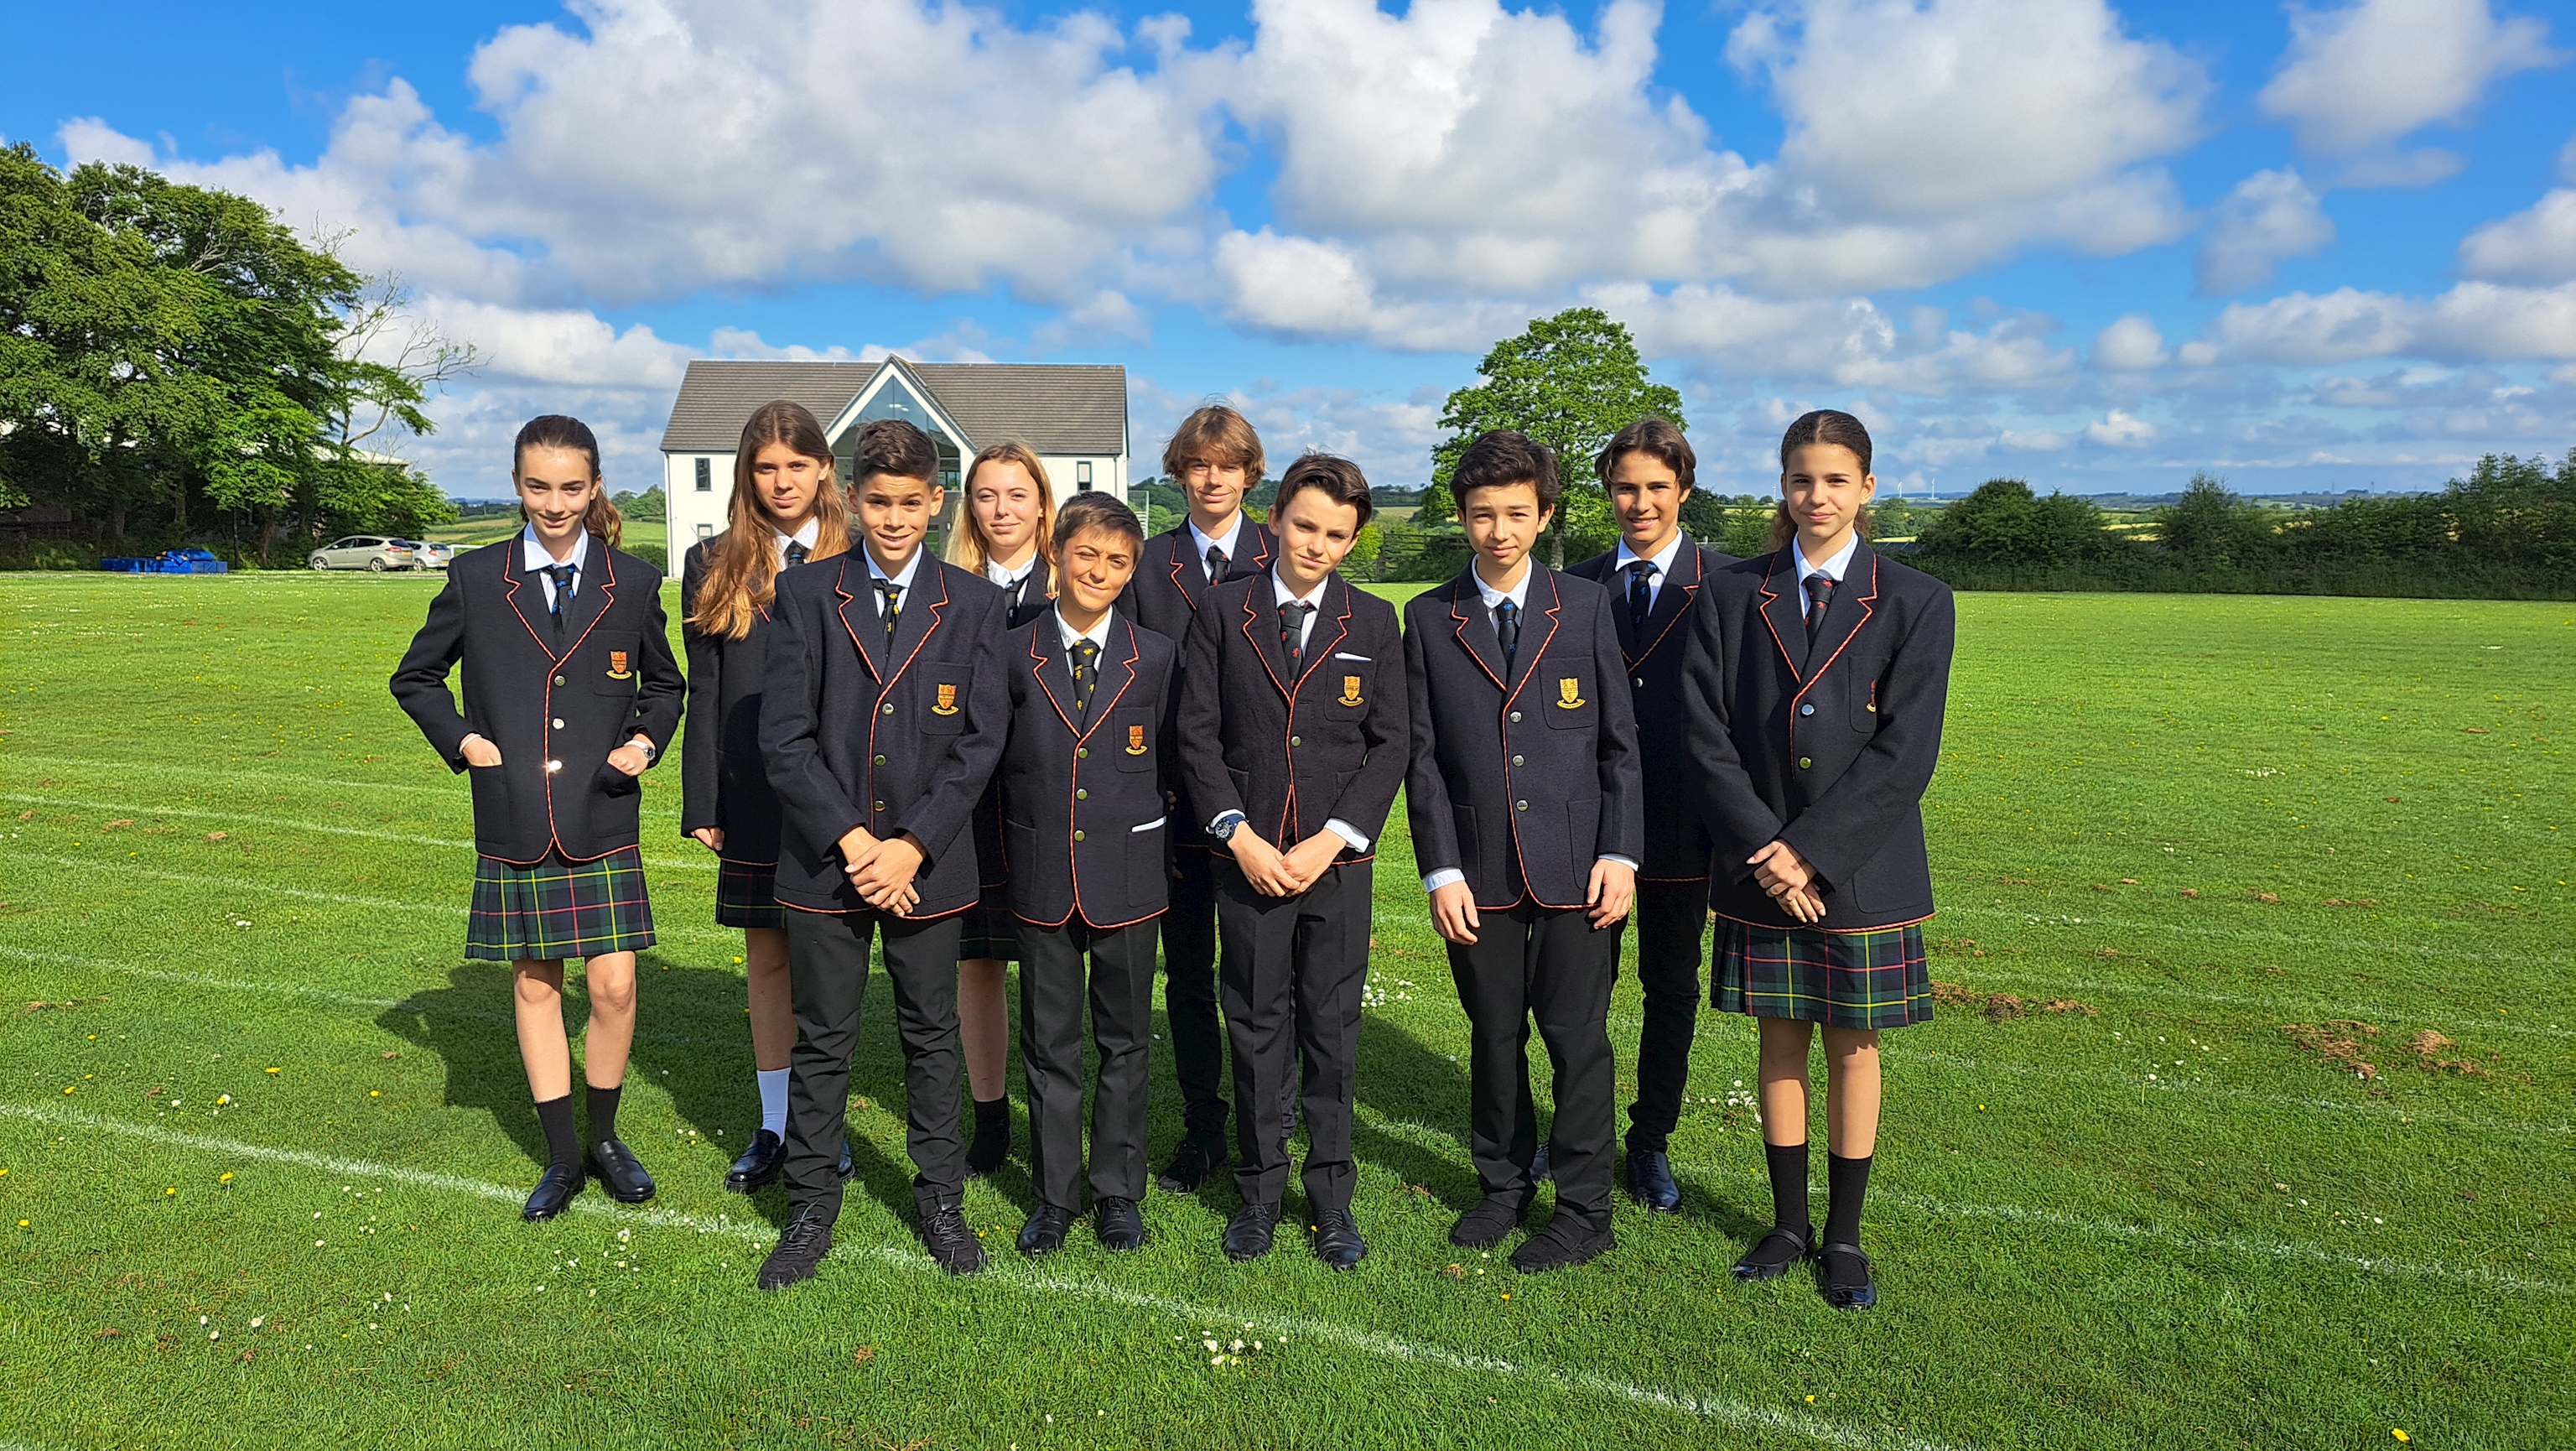 Welcome to our Summer School pupils